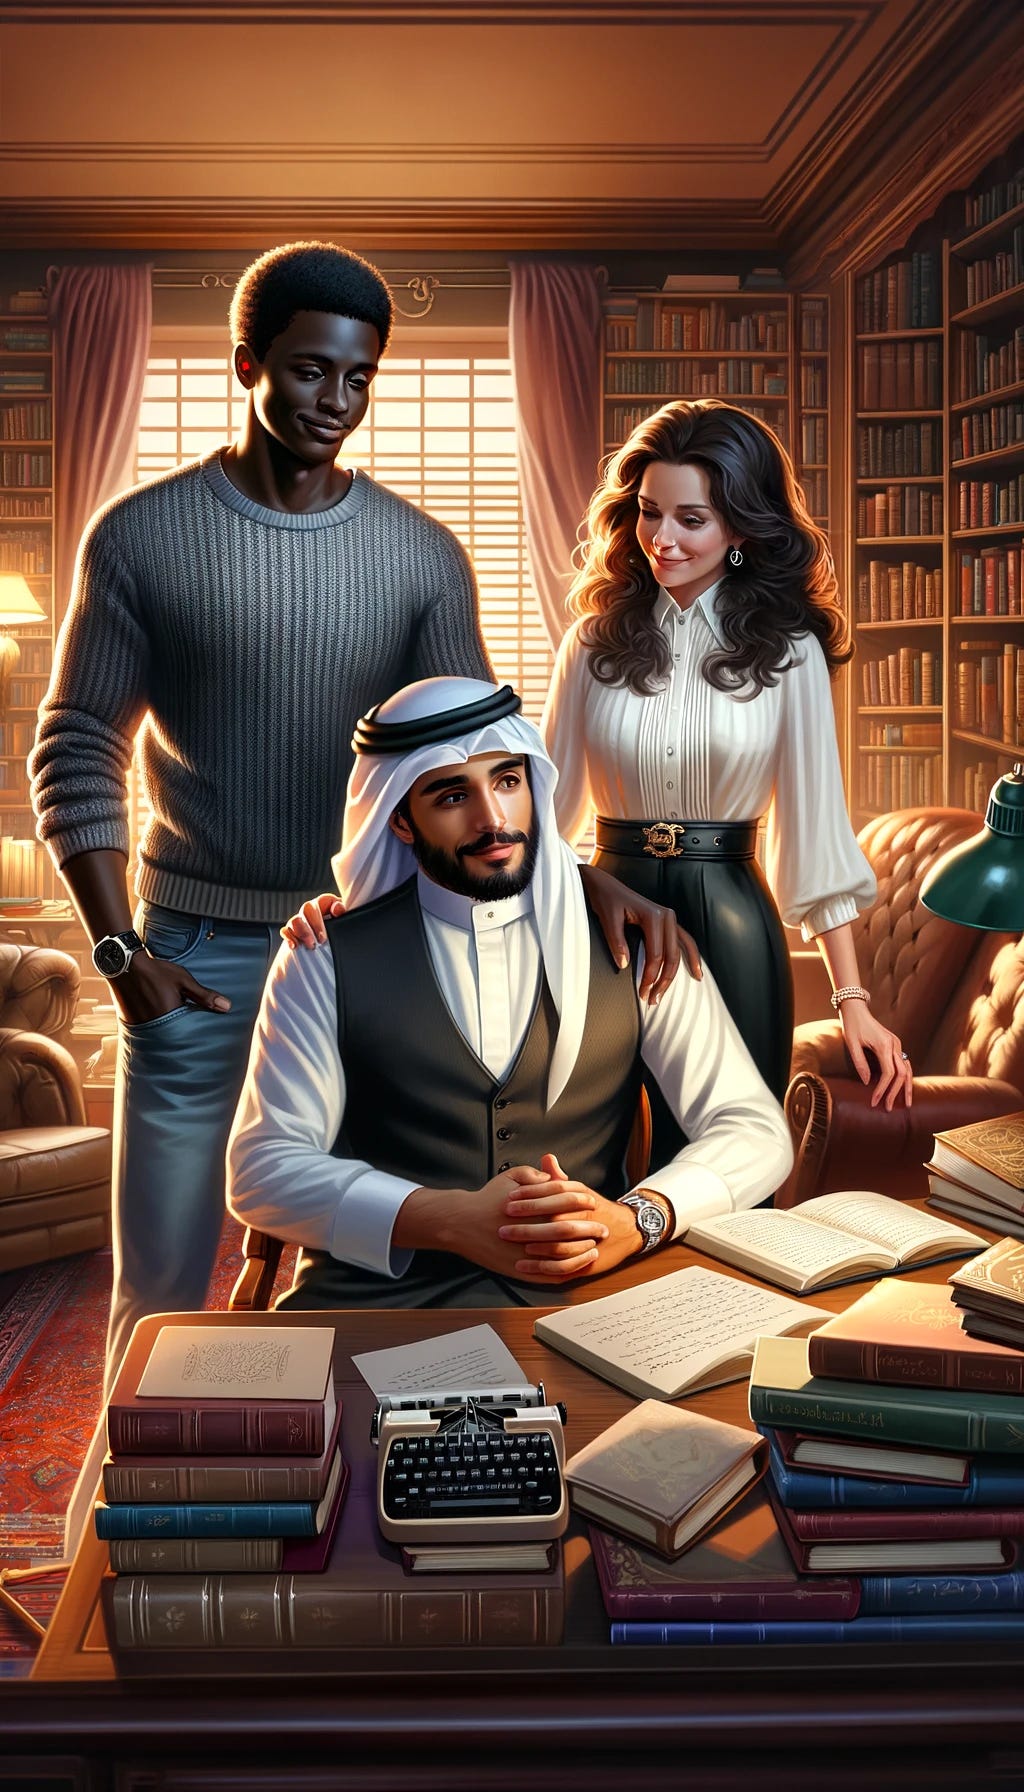 A digital painting of three people in a warmly lit, cozy room filled with books and a writing desk. The first person is a Black man, wearing a casual sweater and jeans, standing with a supportive smile. Beside him is a French woman, elegantly dressed in a chic blouse and skirt, her expression empathetic and encouraging. They are both comforting an Arab writer, who is seated at the desk, surrounded by manuscripts, looking thoughtful and a bit worried. The room exudes a sense of creativity and support, with soft lighting and bookshelves in the background.